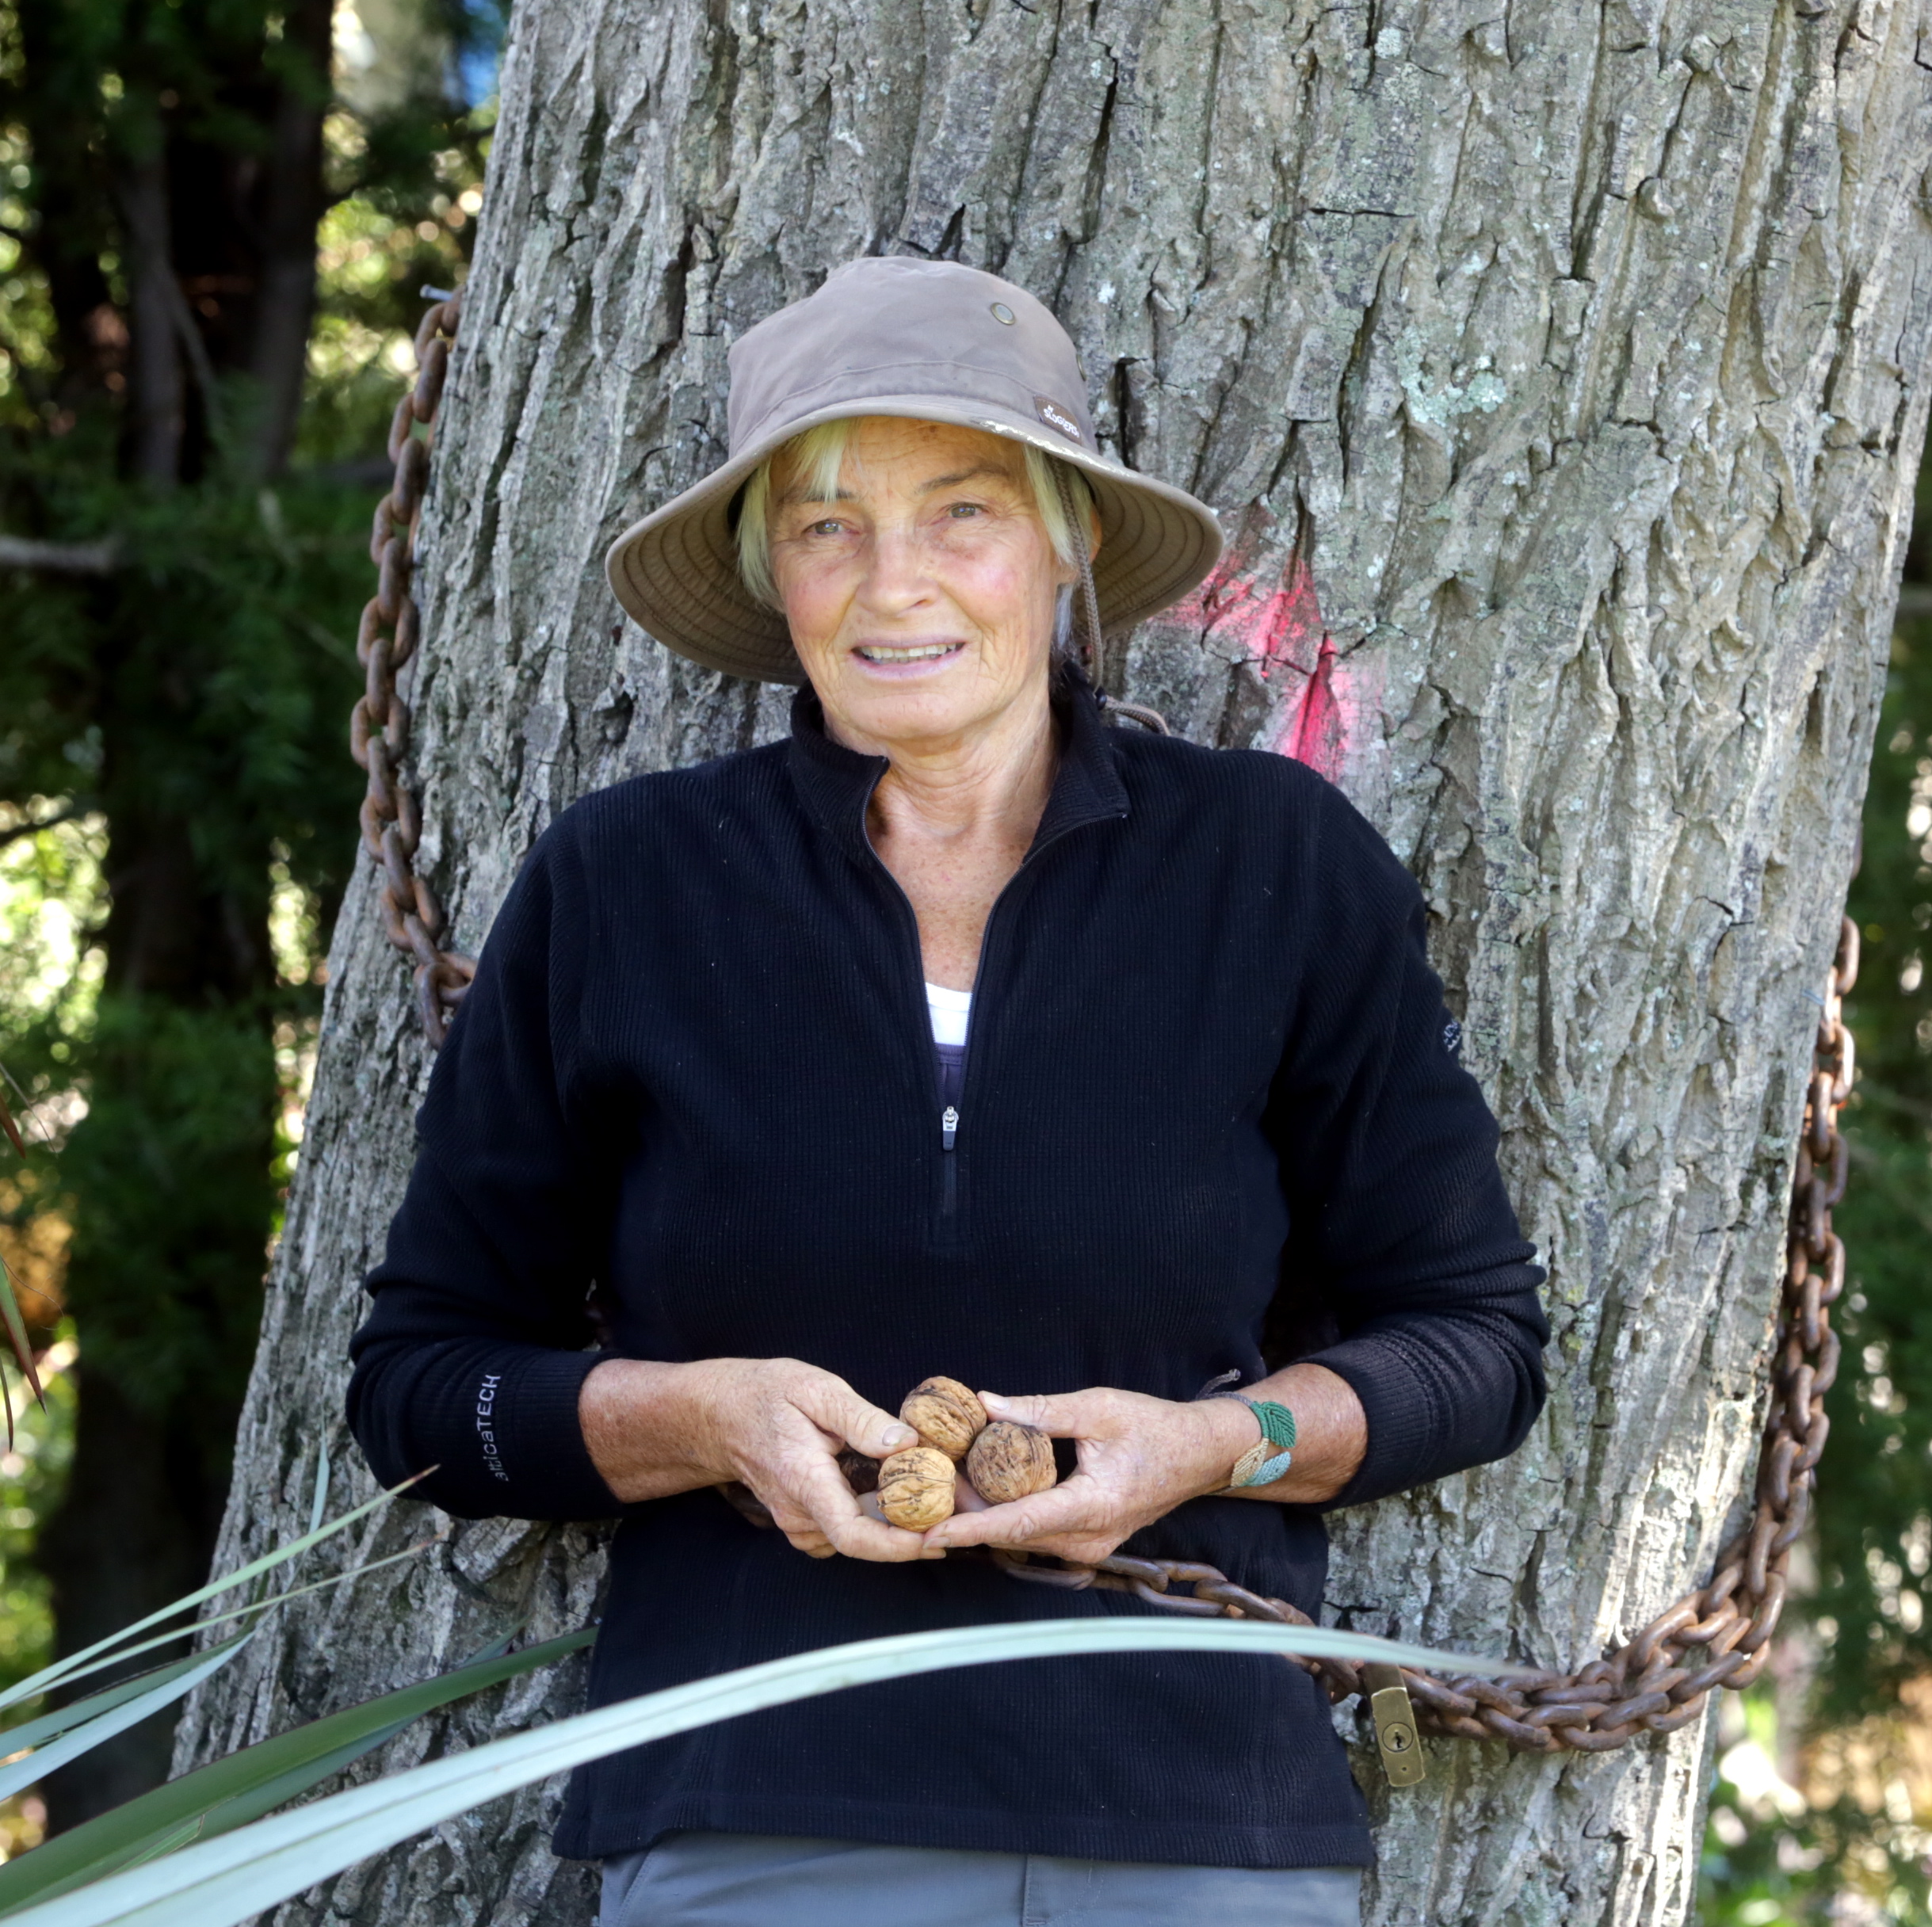 Chaining yourself to tree does work: Protester wins reprieve for her favourite walnut tree - NZ Herald